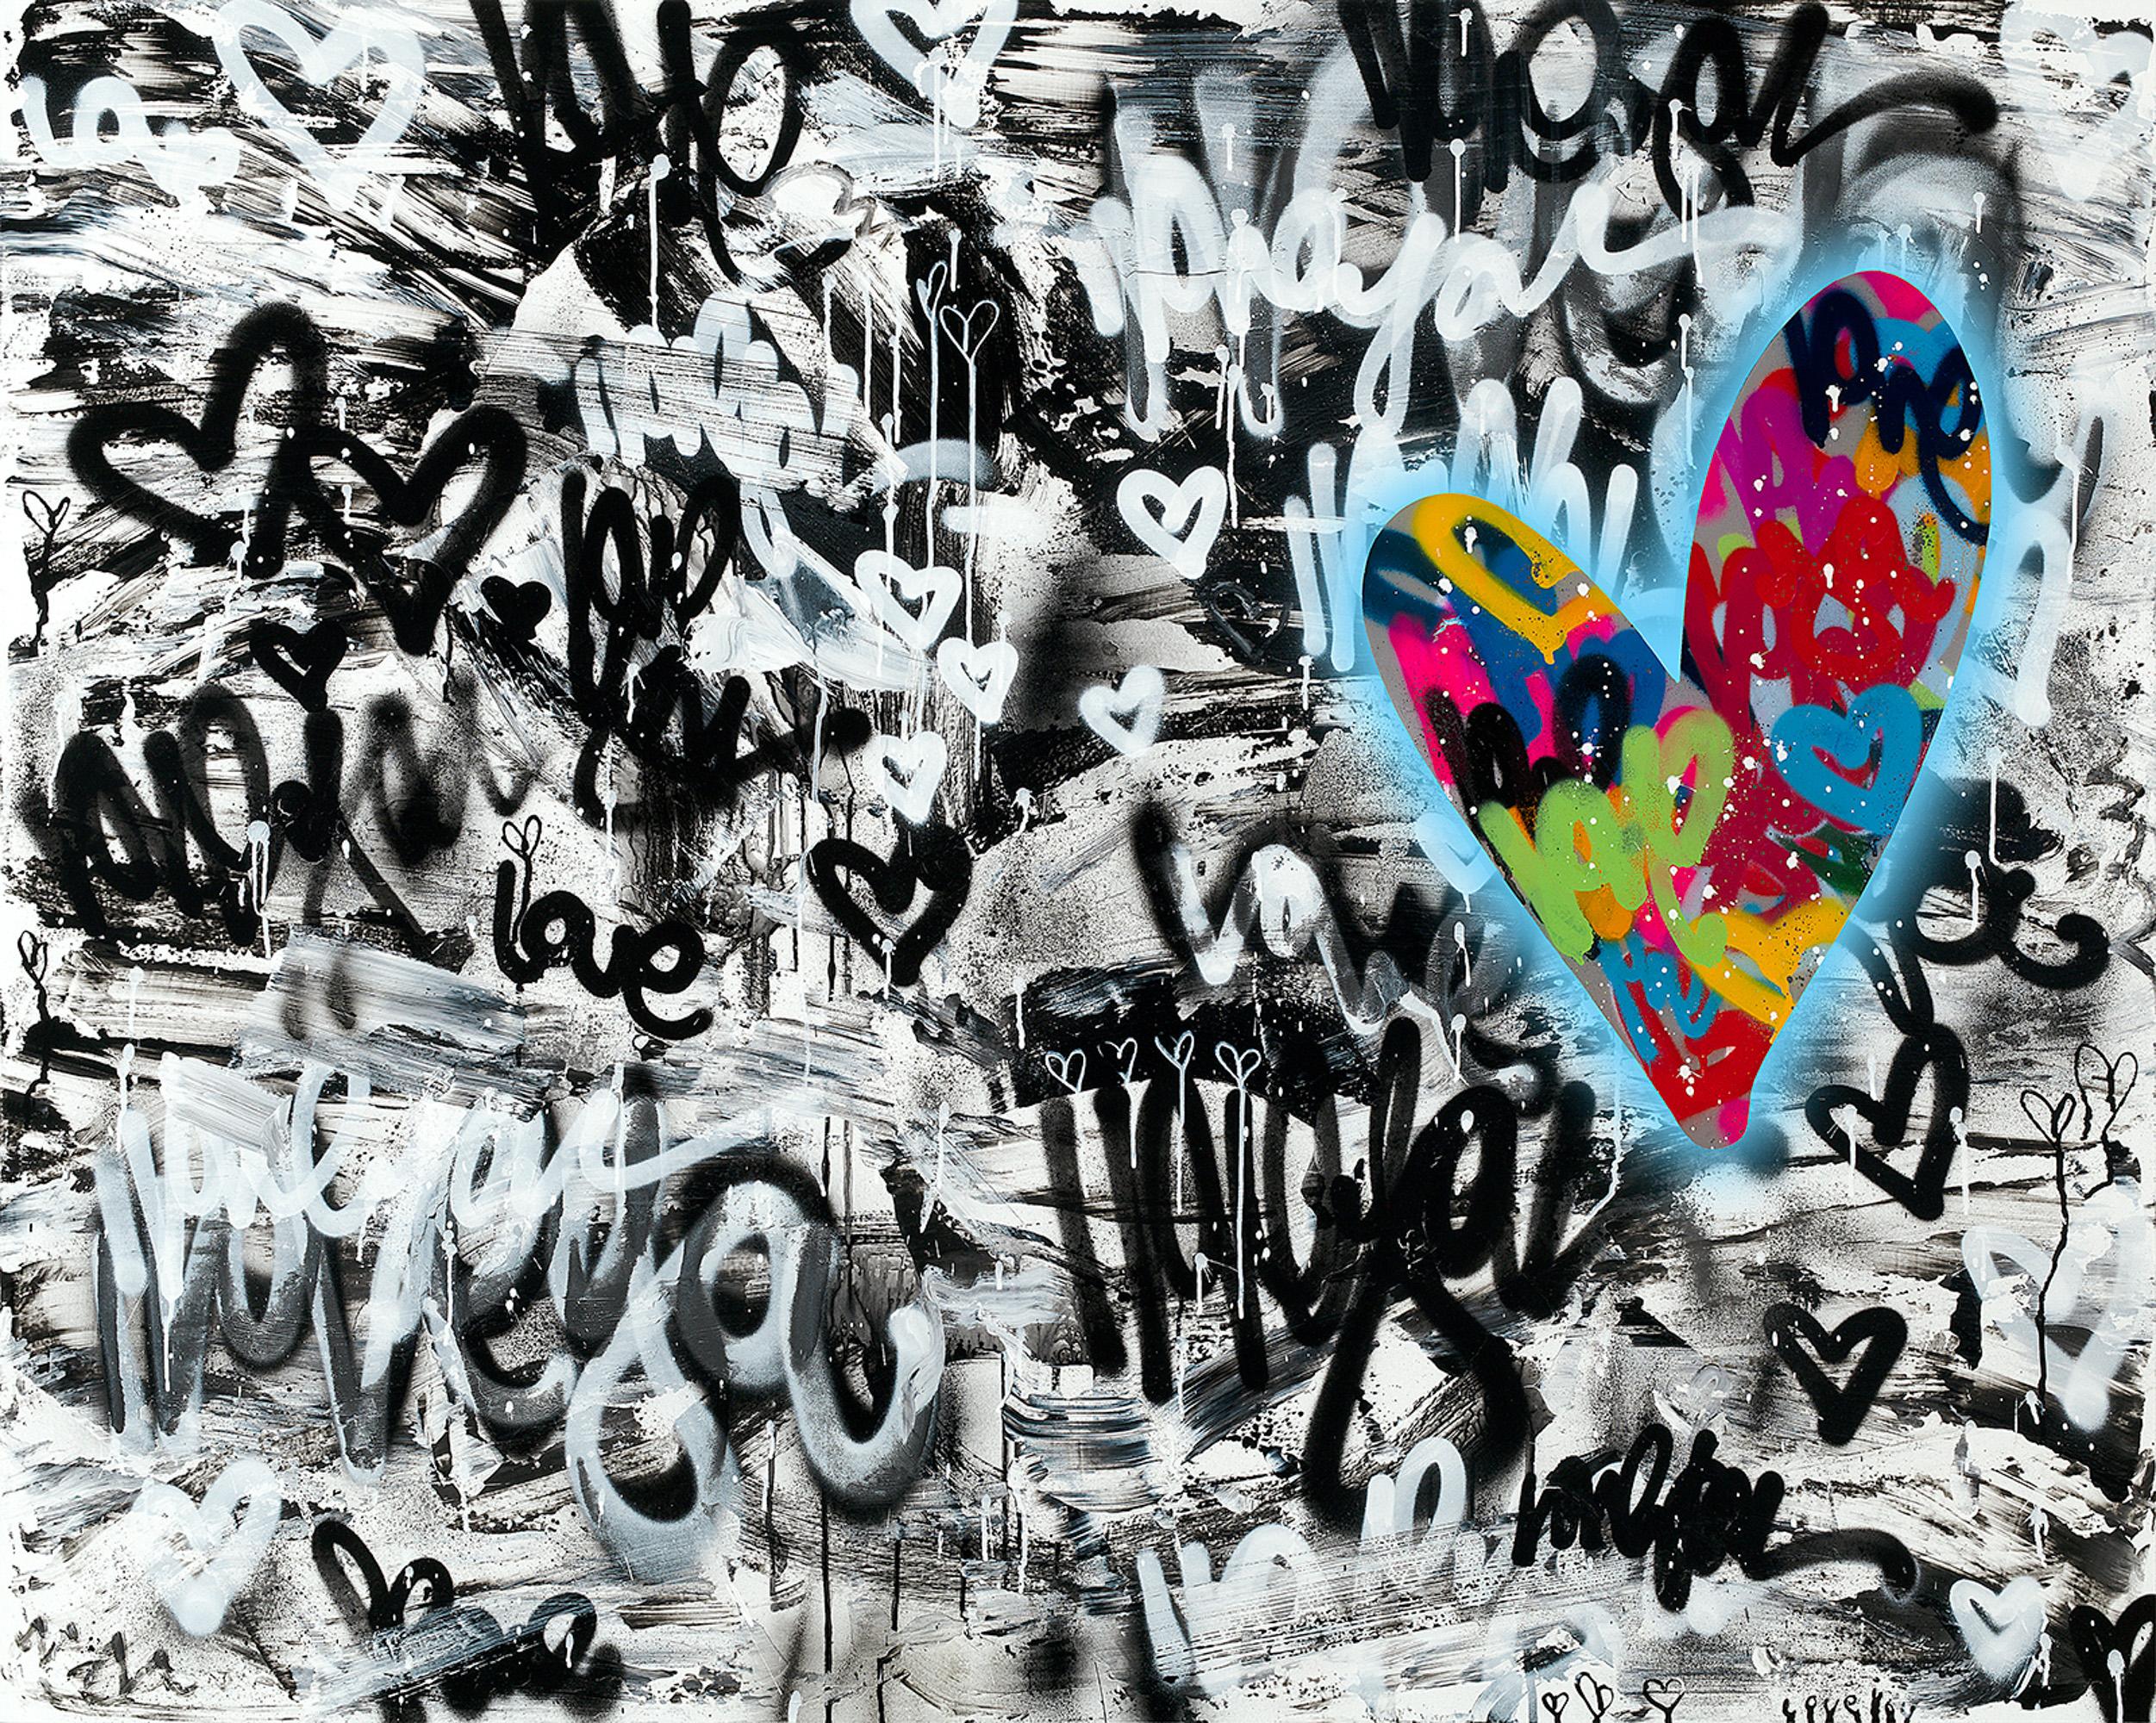 Amber Goldhammer Abstract Painting - "My Heart Will Always Radiate Love" Colorful Graffiti Style Painting with LEDs